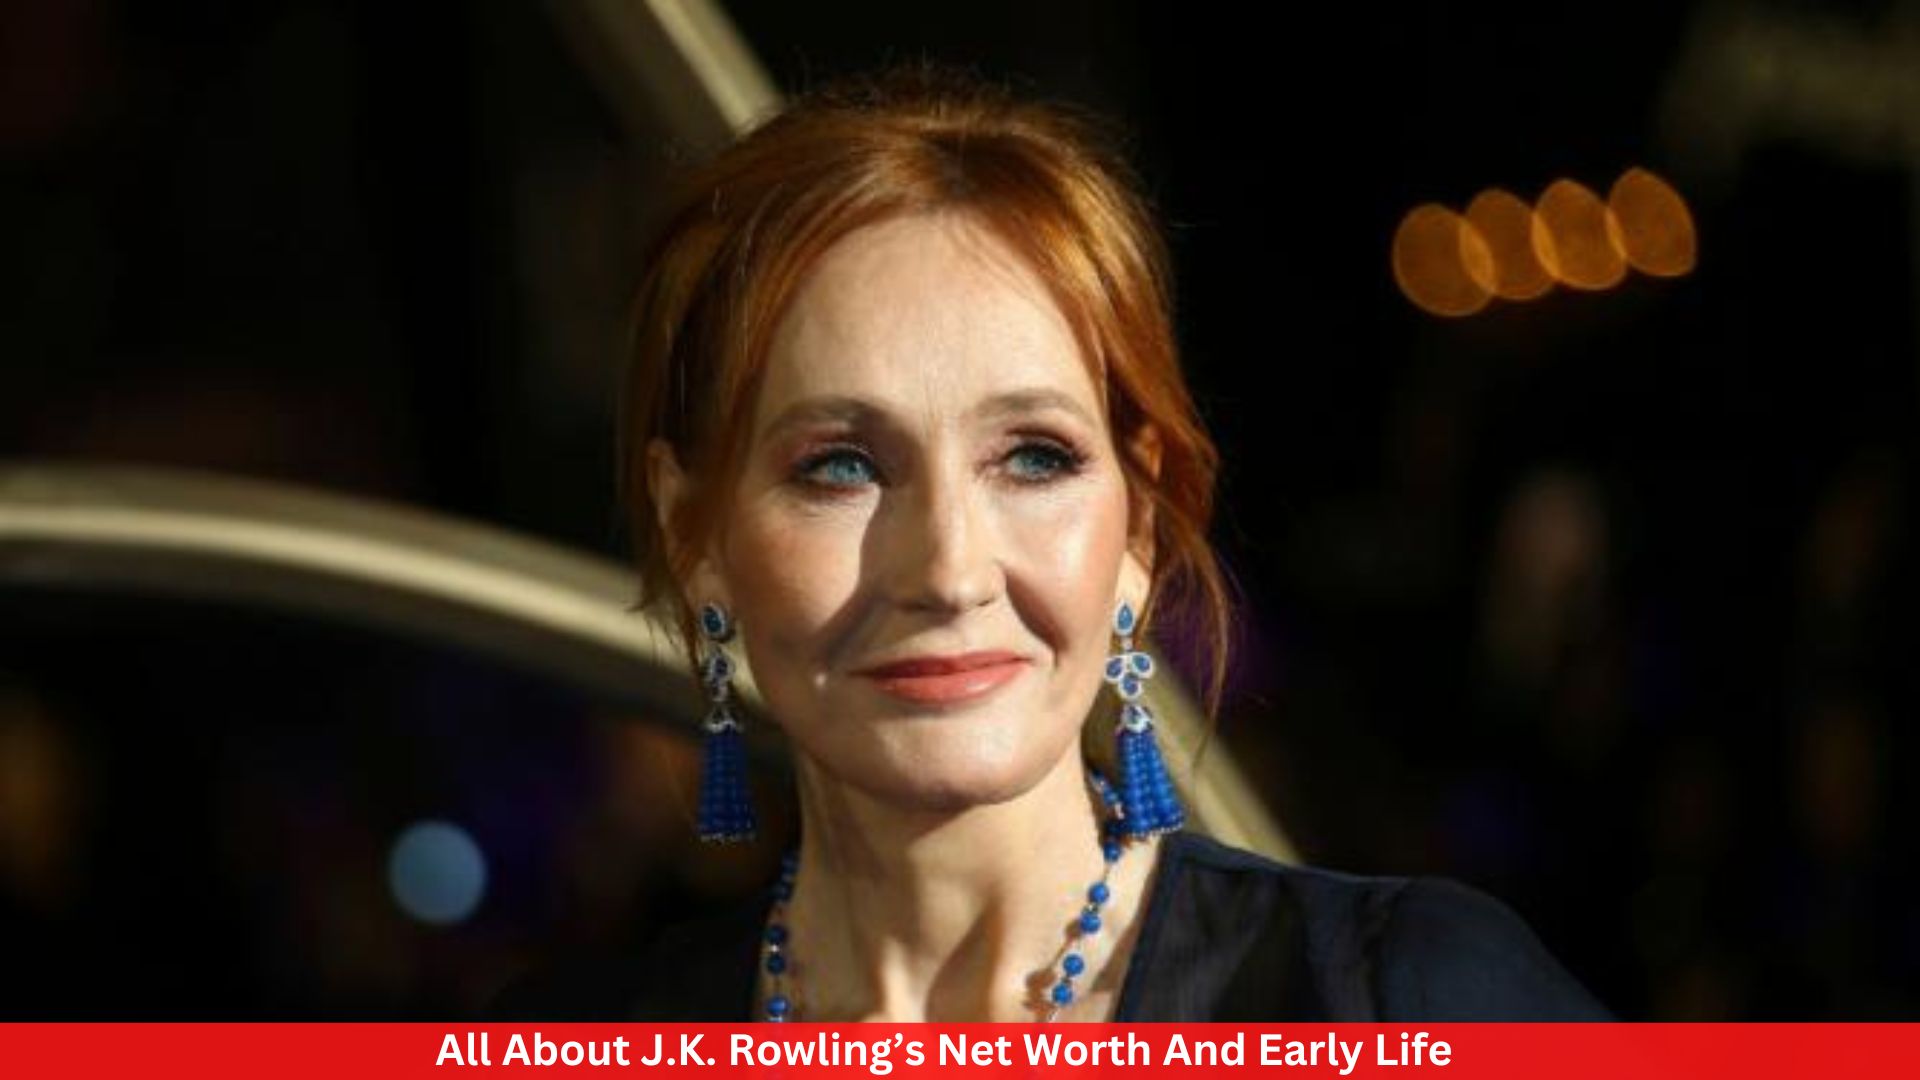 All About J.K. Rowling’s Net Worth And Early Life